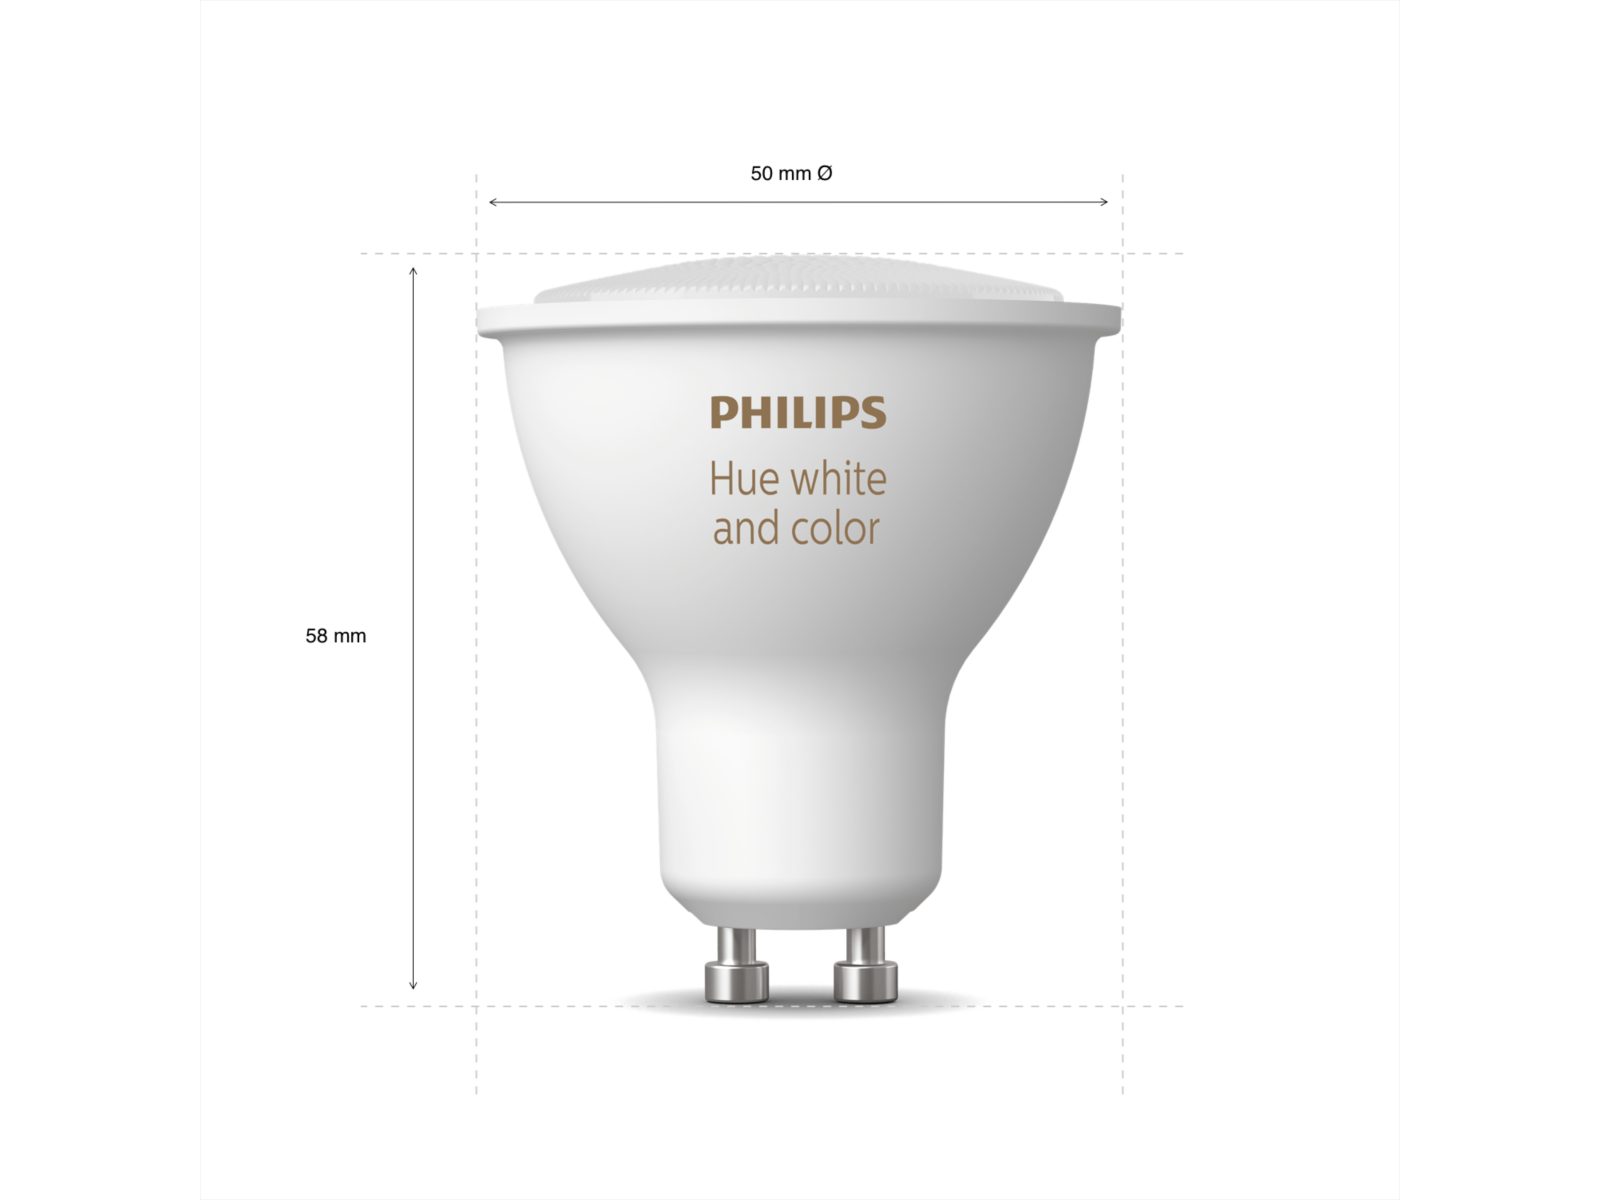 Philips Hue GU10 Bulb with its dimensions